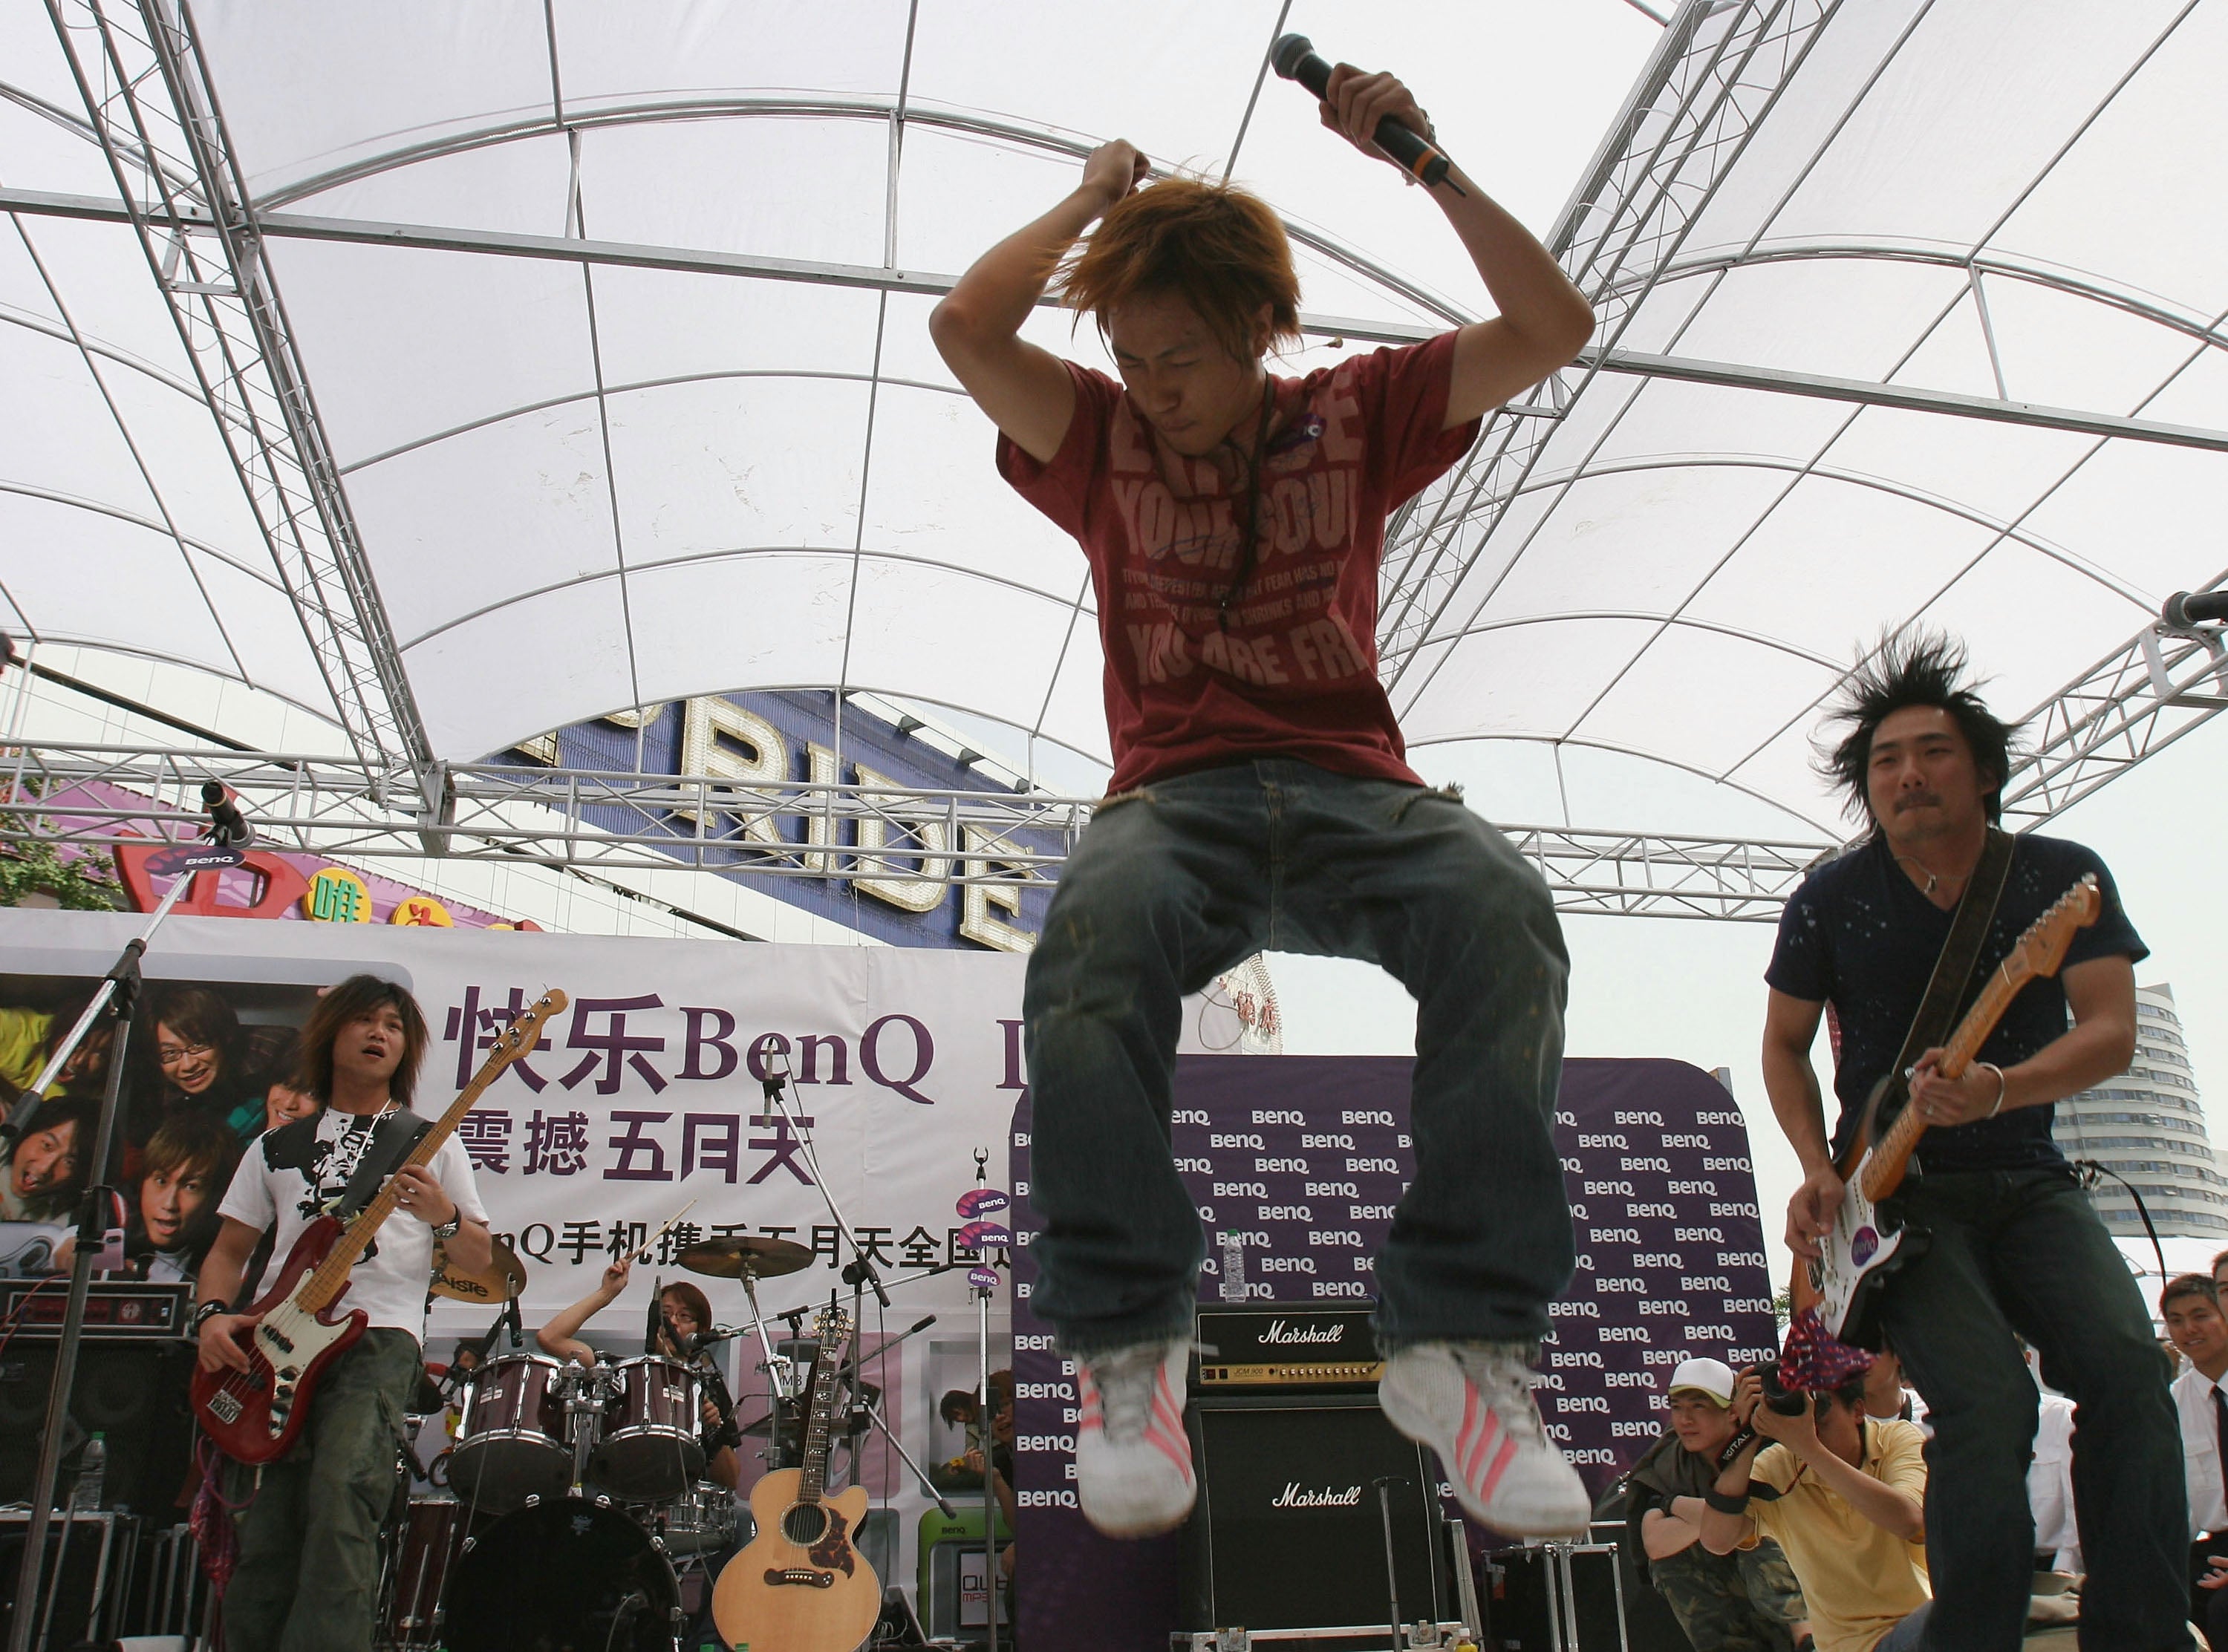 Members of Taiwan rock band "Mayday" perform during a show on May 6, 2005 in Chengdu of Sichuan Province, China.